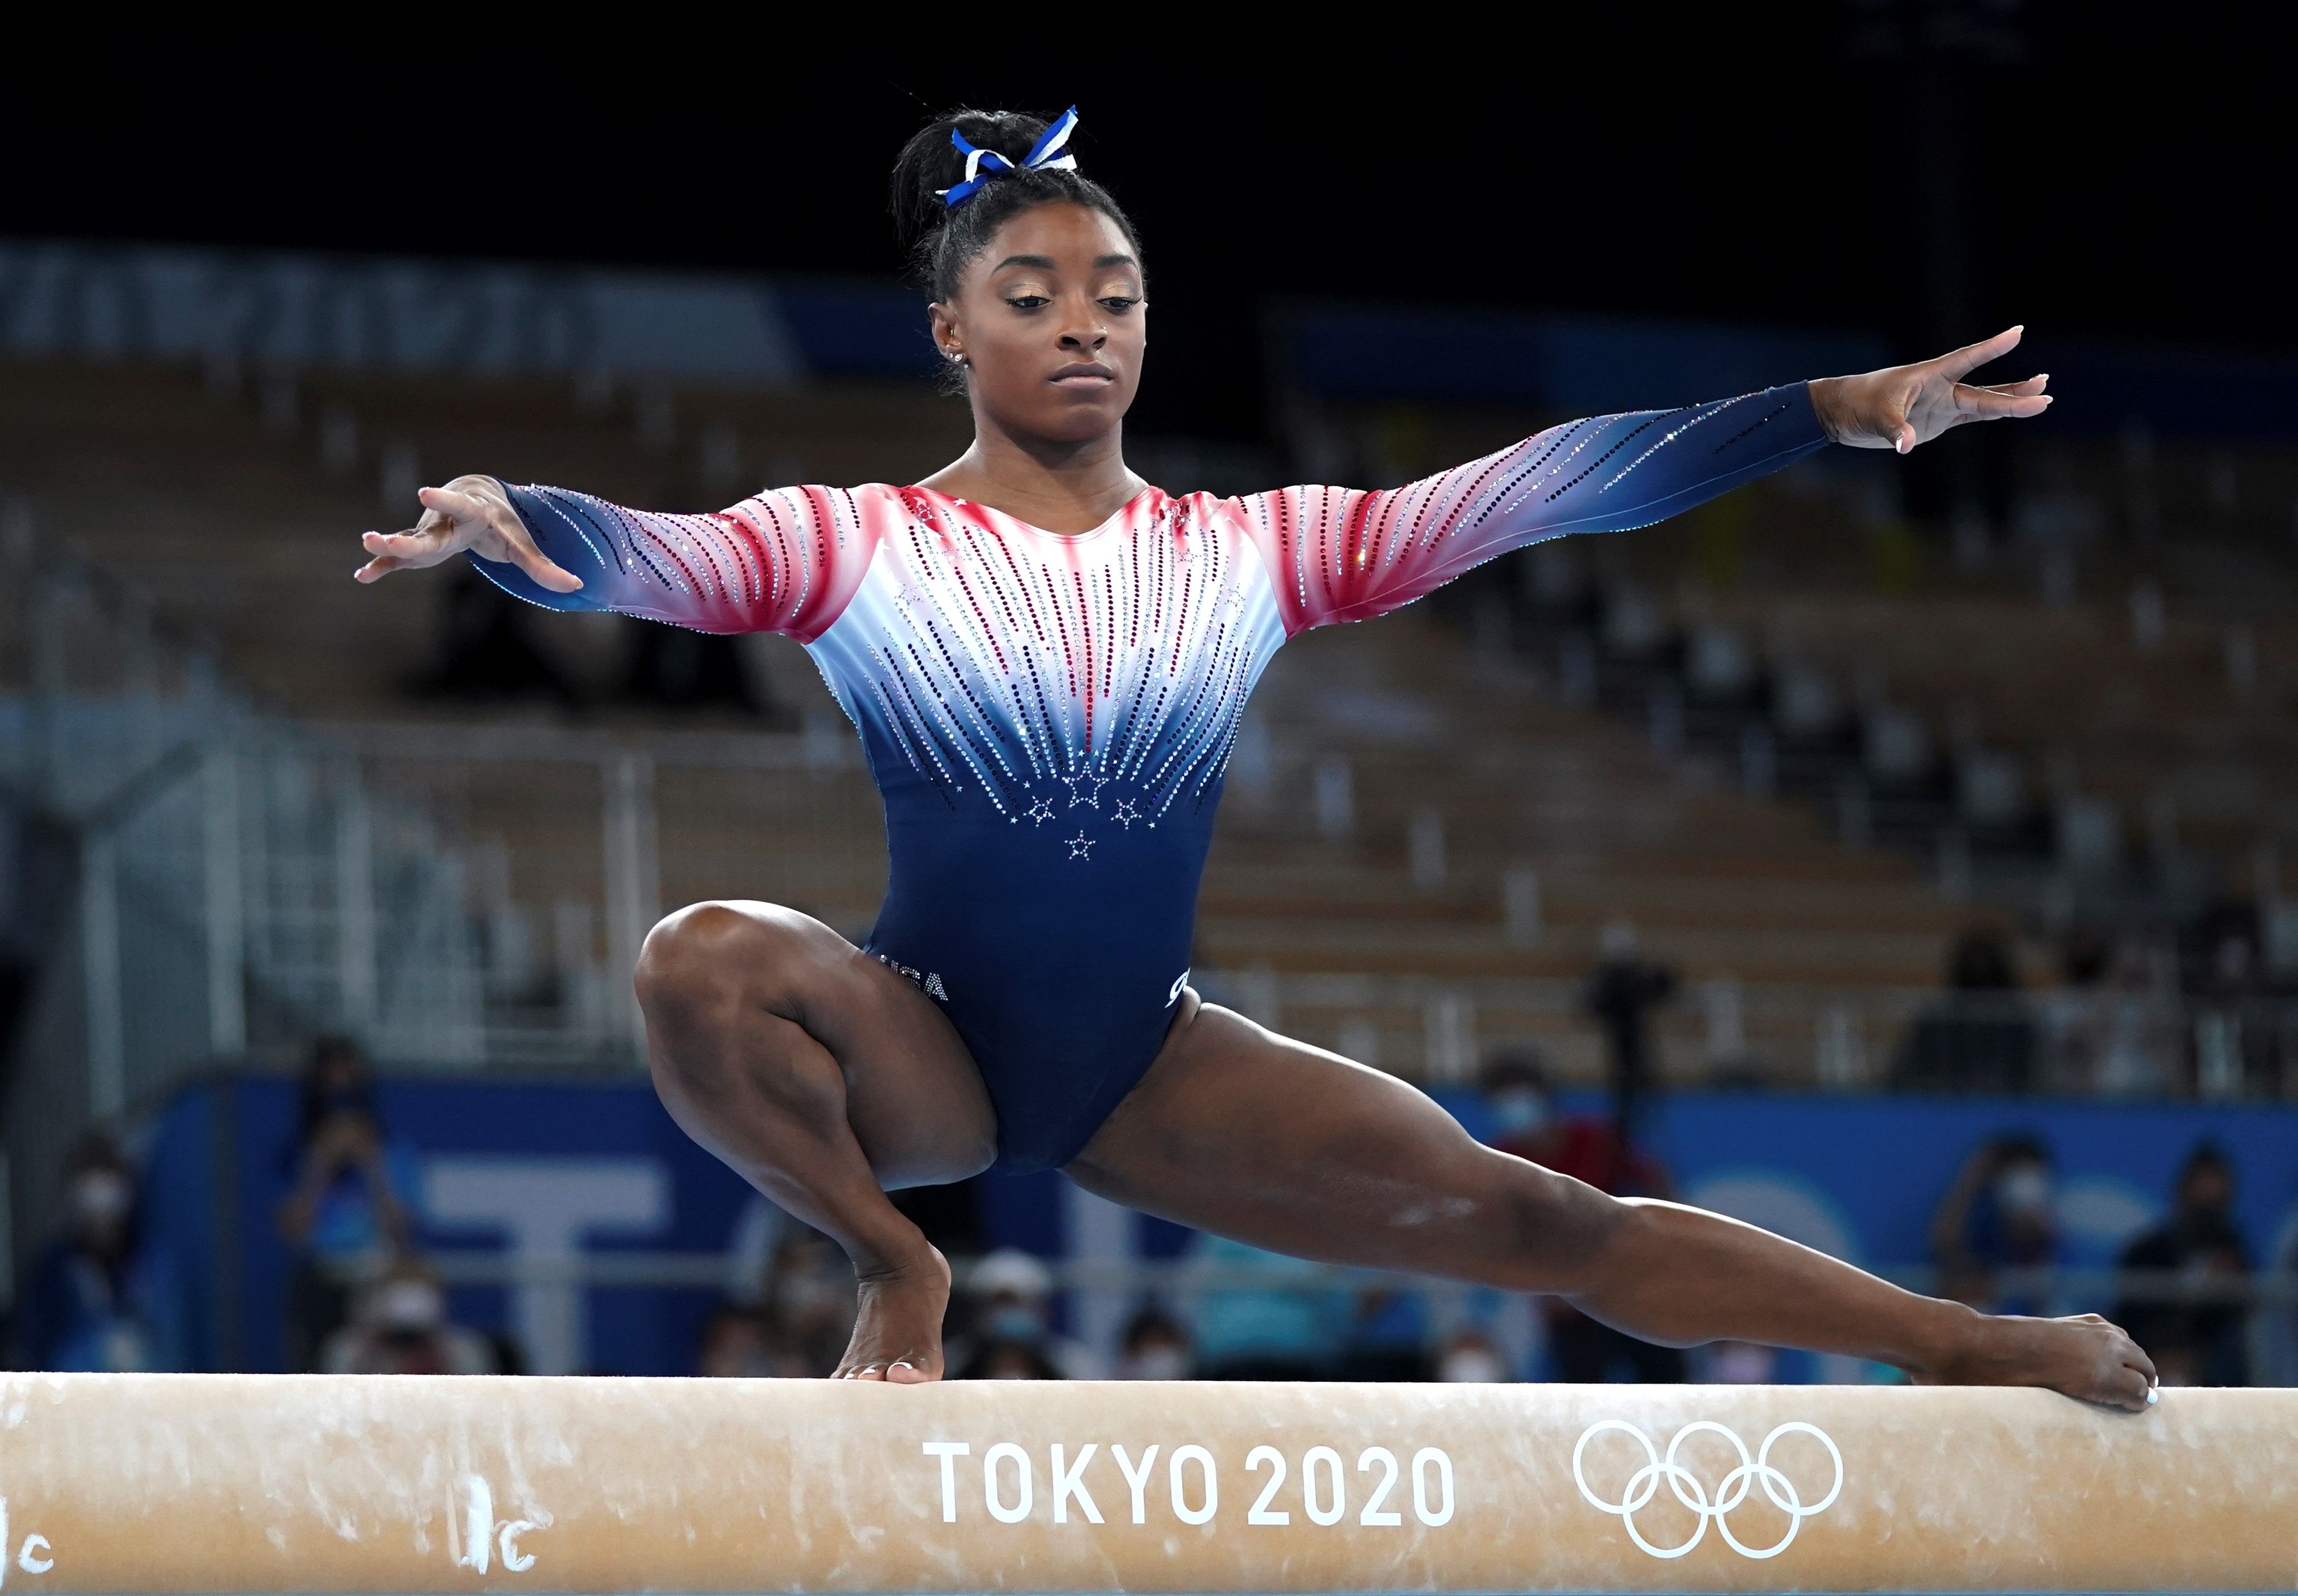 Will Simone Biles Compete At The 2024 Olympic Games? The Gymnast